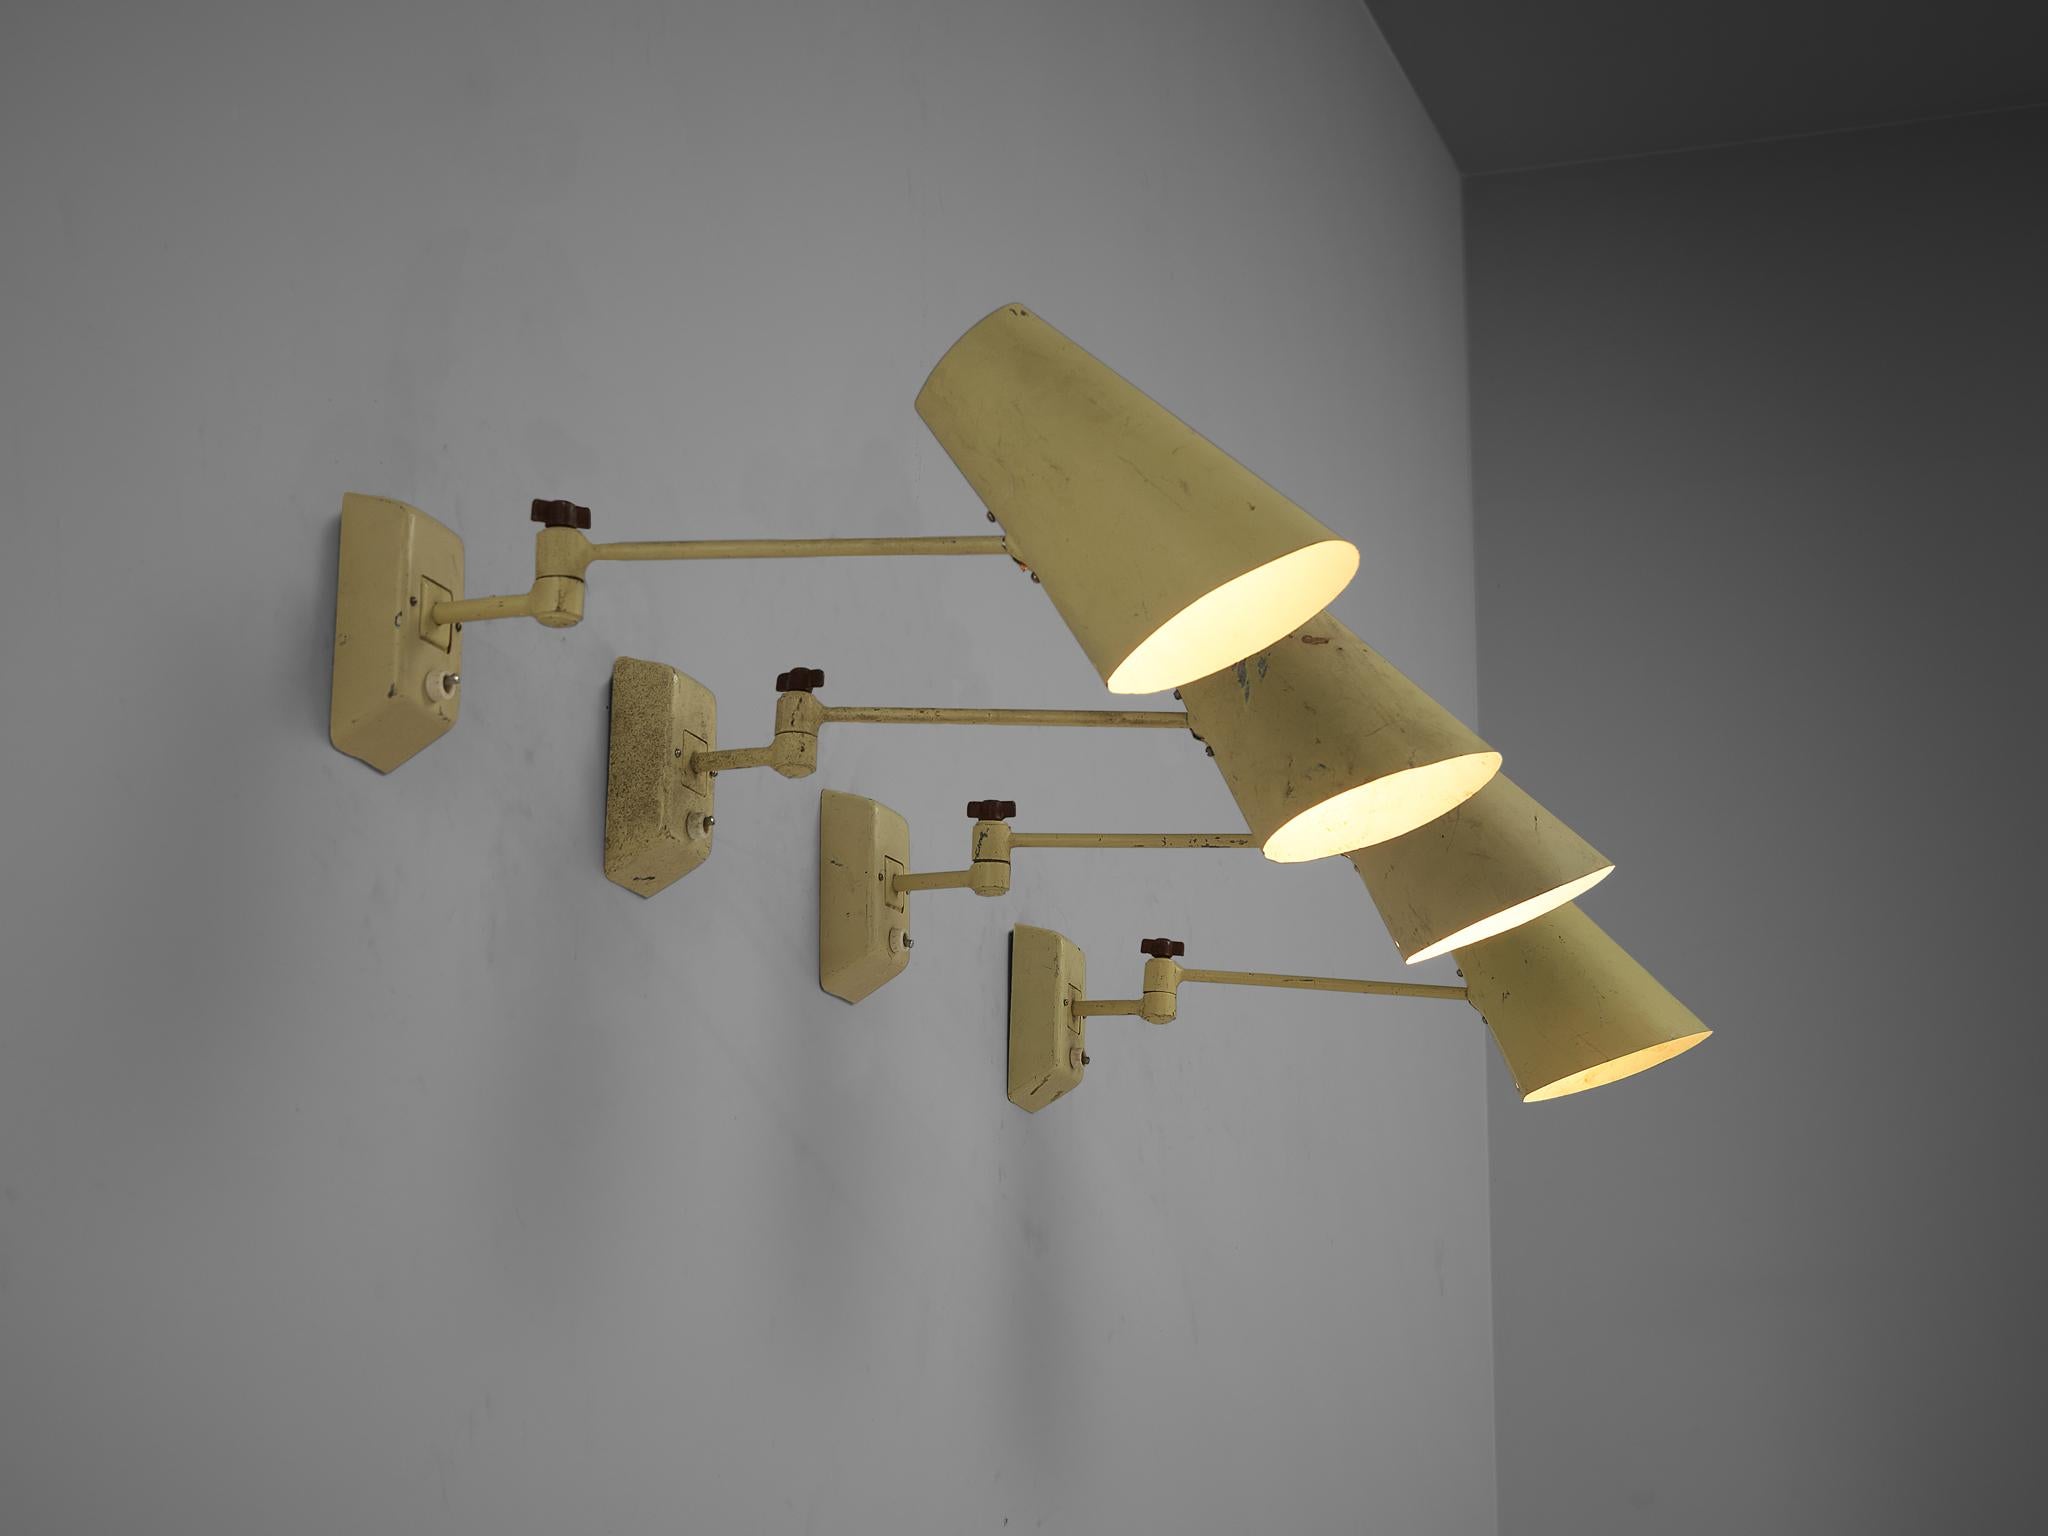 Set of four wall lights, lacquered metal, Europe, 1950s

Simple and sleek wall lights in pale yellow lacquered metal with adjustable rods and shades. The base of the lamps is attached to the wall and the light switch is located there. These lamps